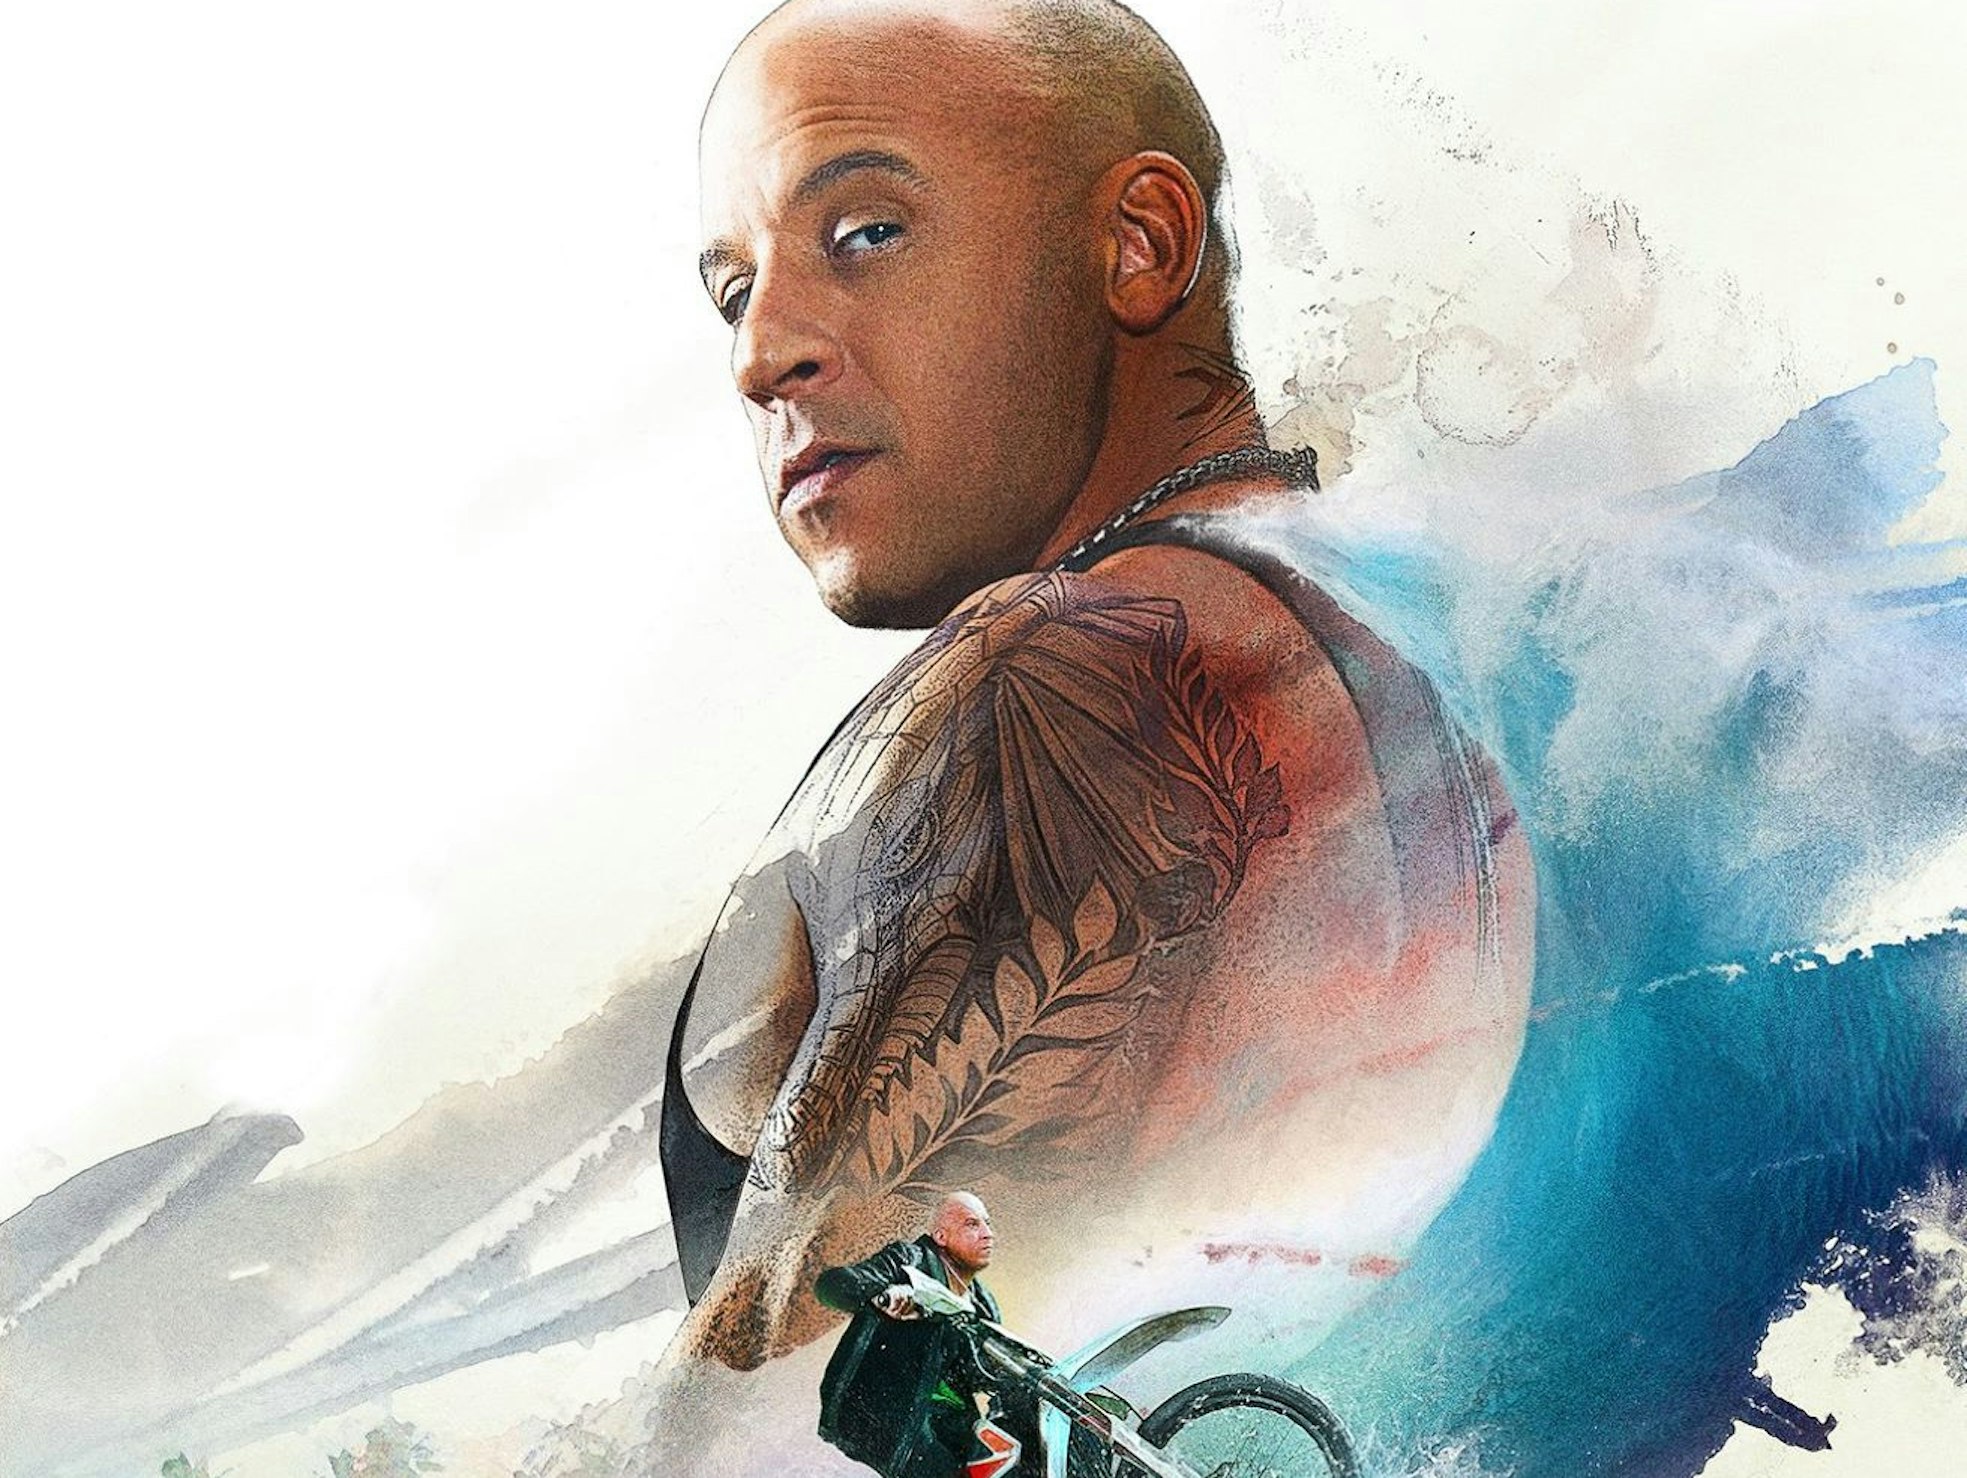 The Trailer for 'xXx Return of Xander Cage' Is Peak Vin Diesel and It